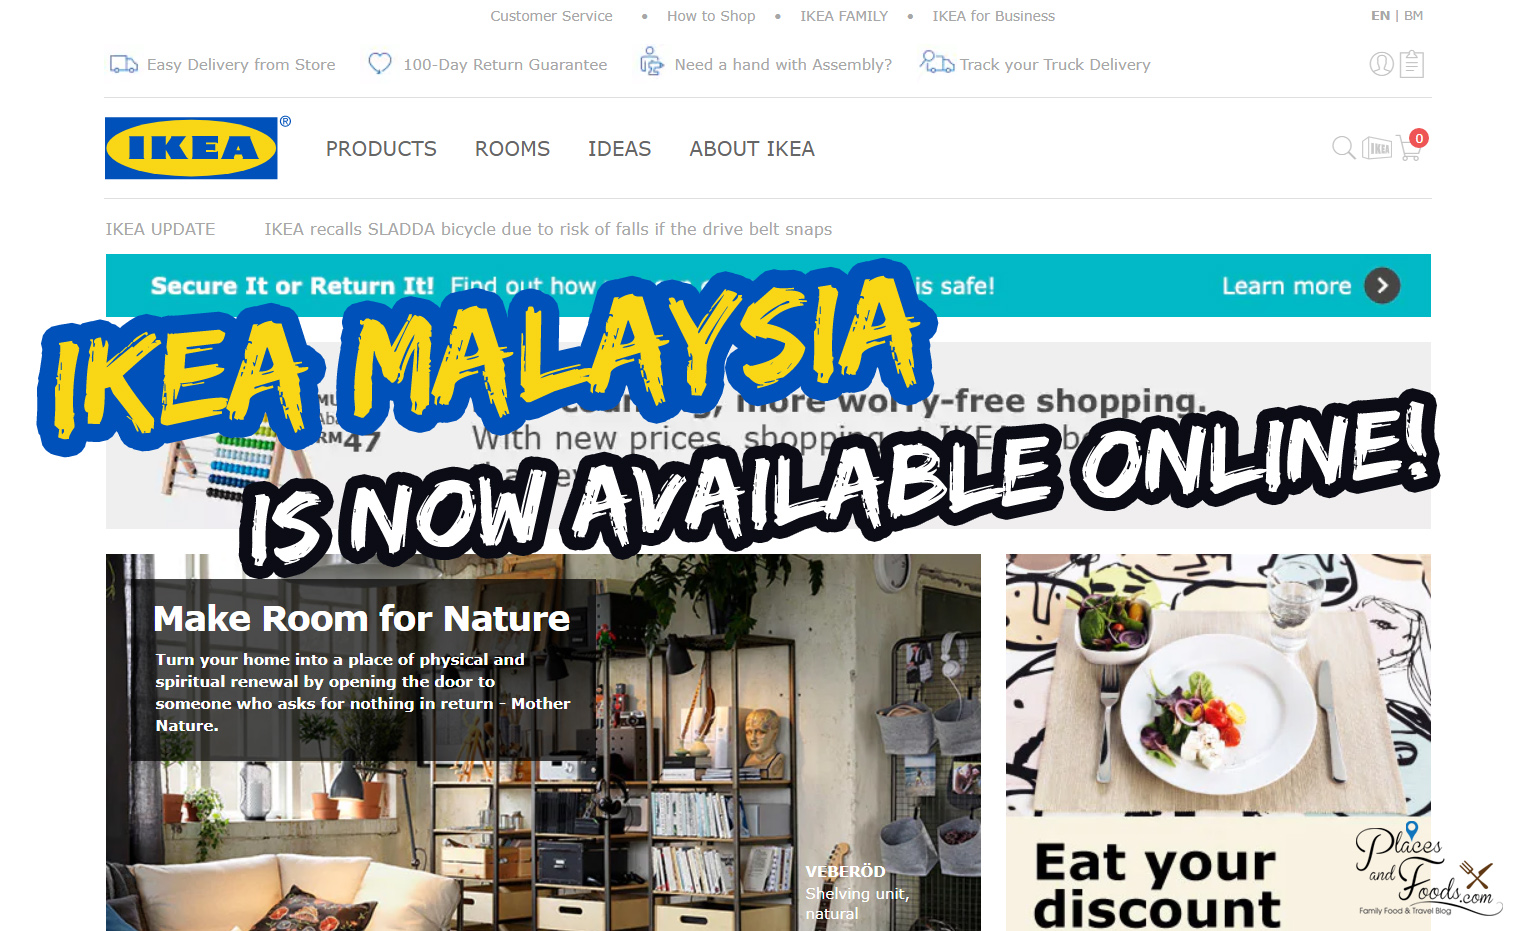  IKEA Malaysia  is now available ONLINE 